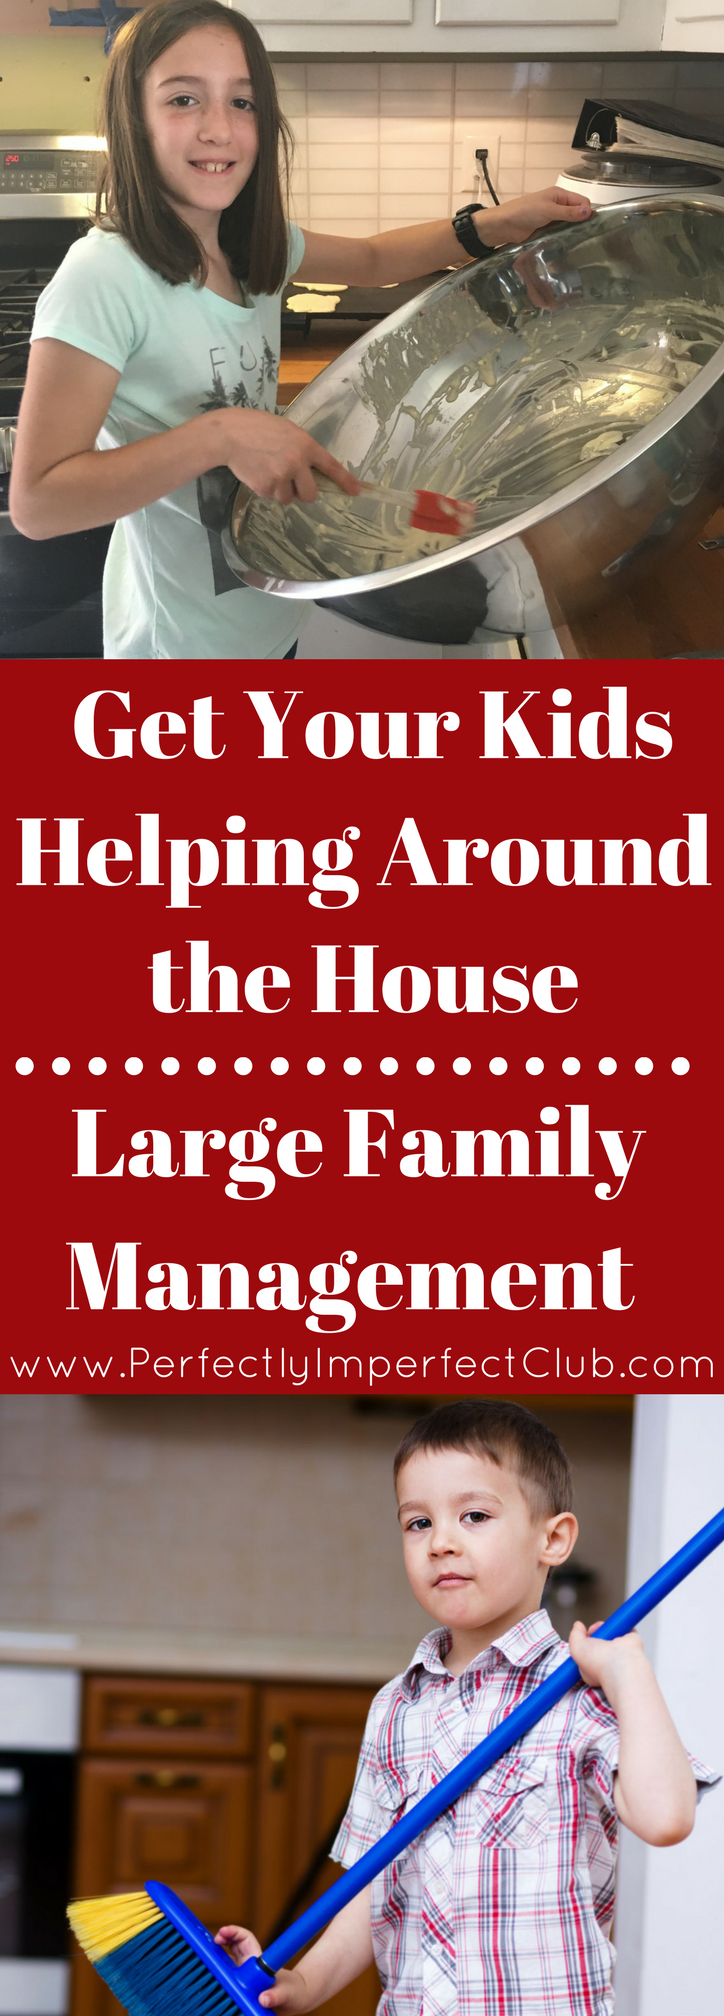 Children's Chores By Age| Chores for Kids| Chores for Teens| Large Family Chores| Large Family Organization